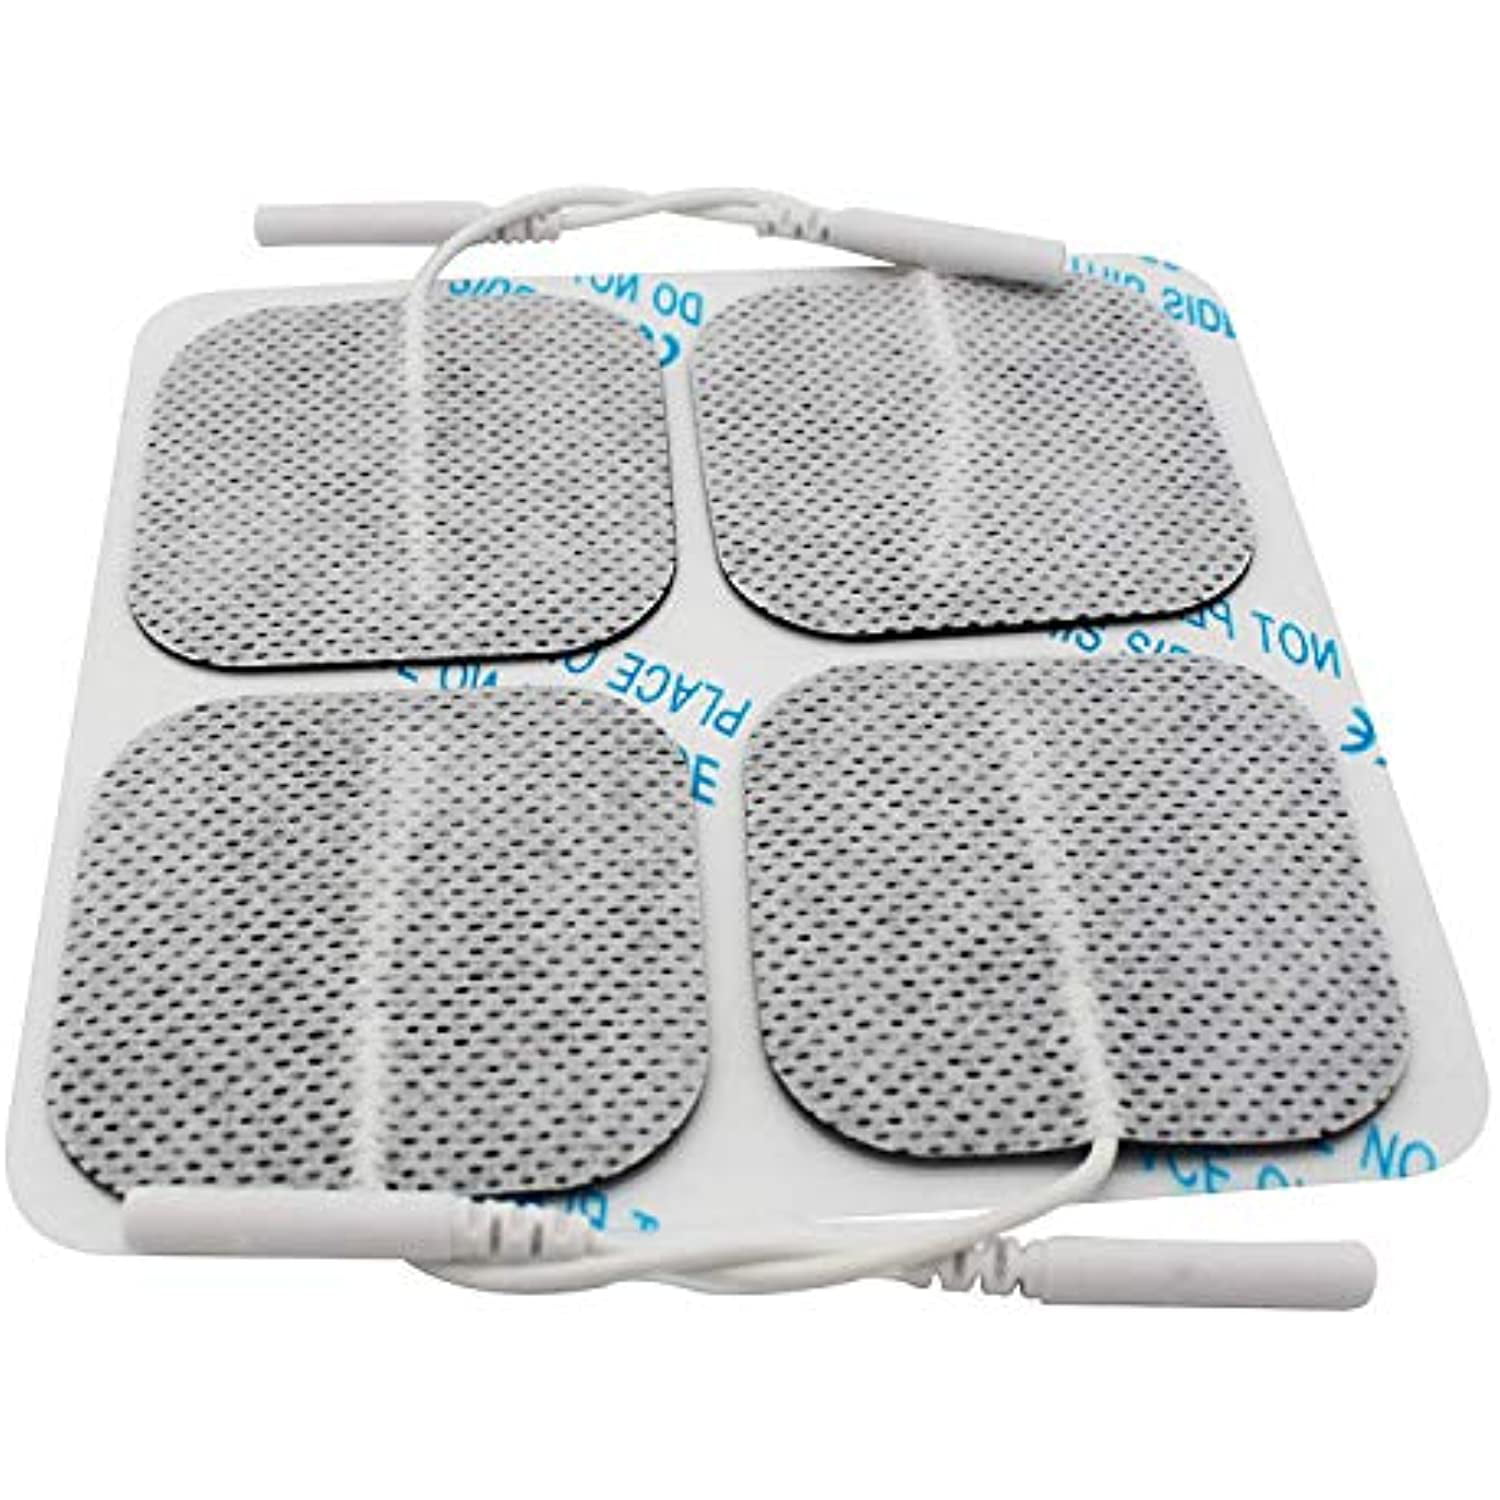 Syrtenty TENS Unit Pads 2X2 3rd Gen Reusable Latex-Free Replacement Pads  Electrode Pads with Upgraded Sticky Electrode Pads Gel and Non-Irritating